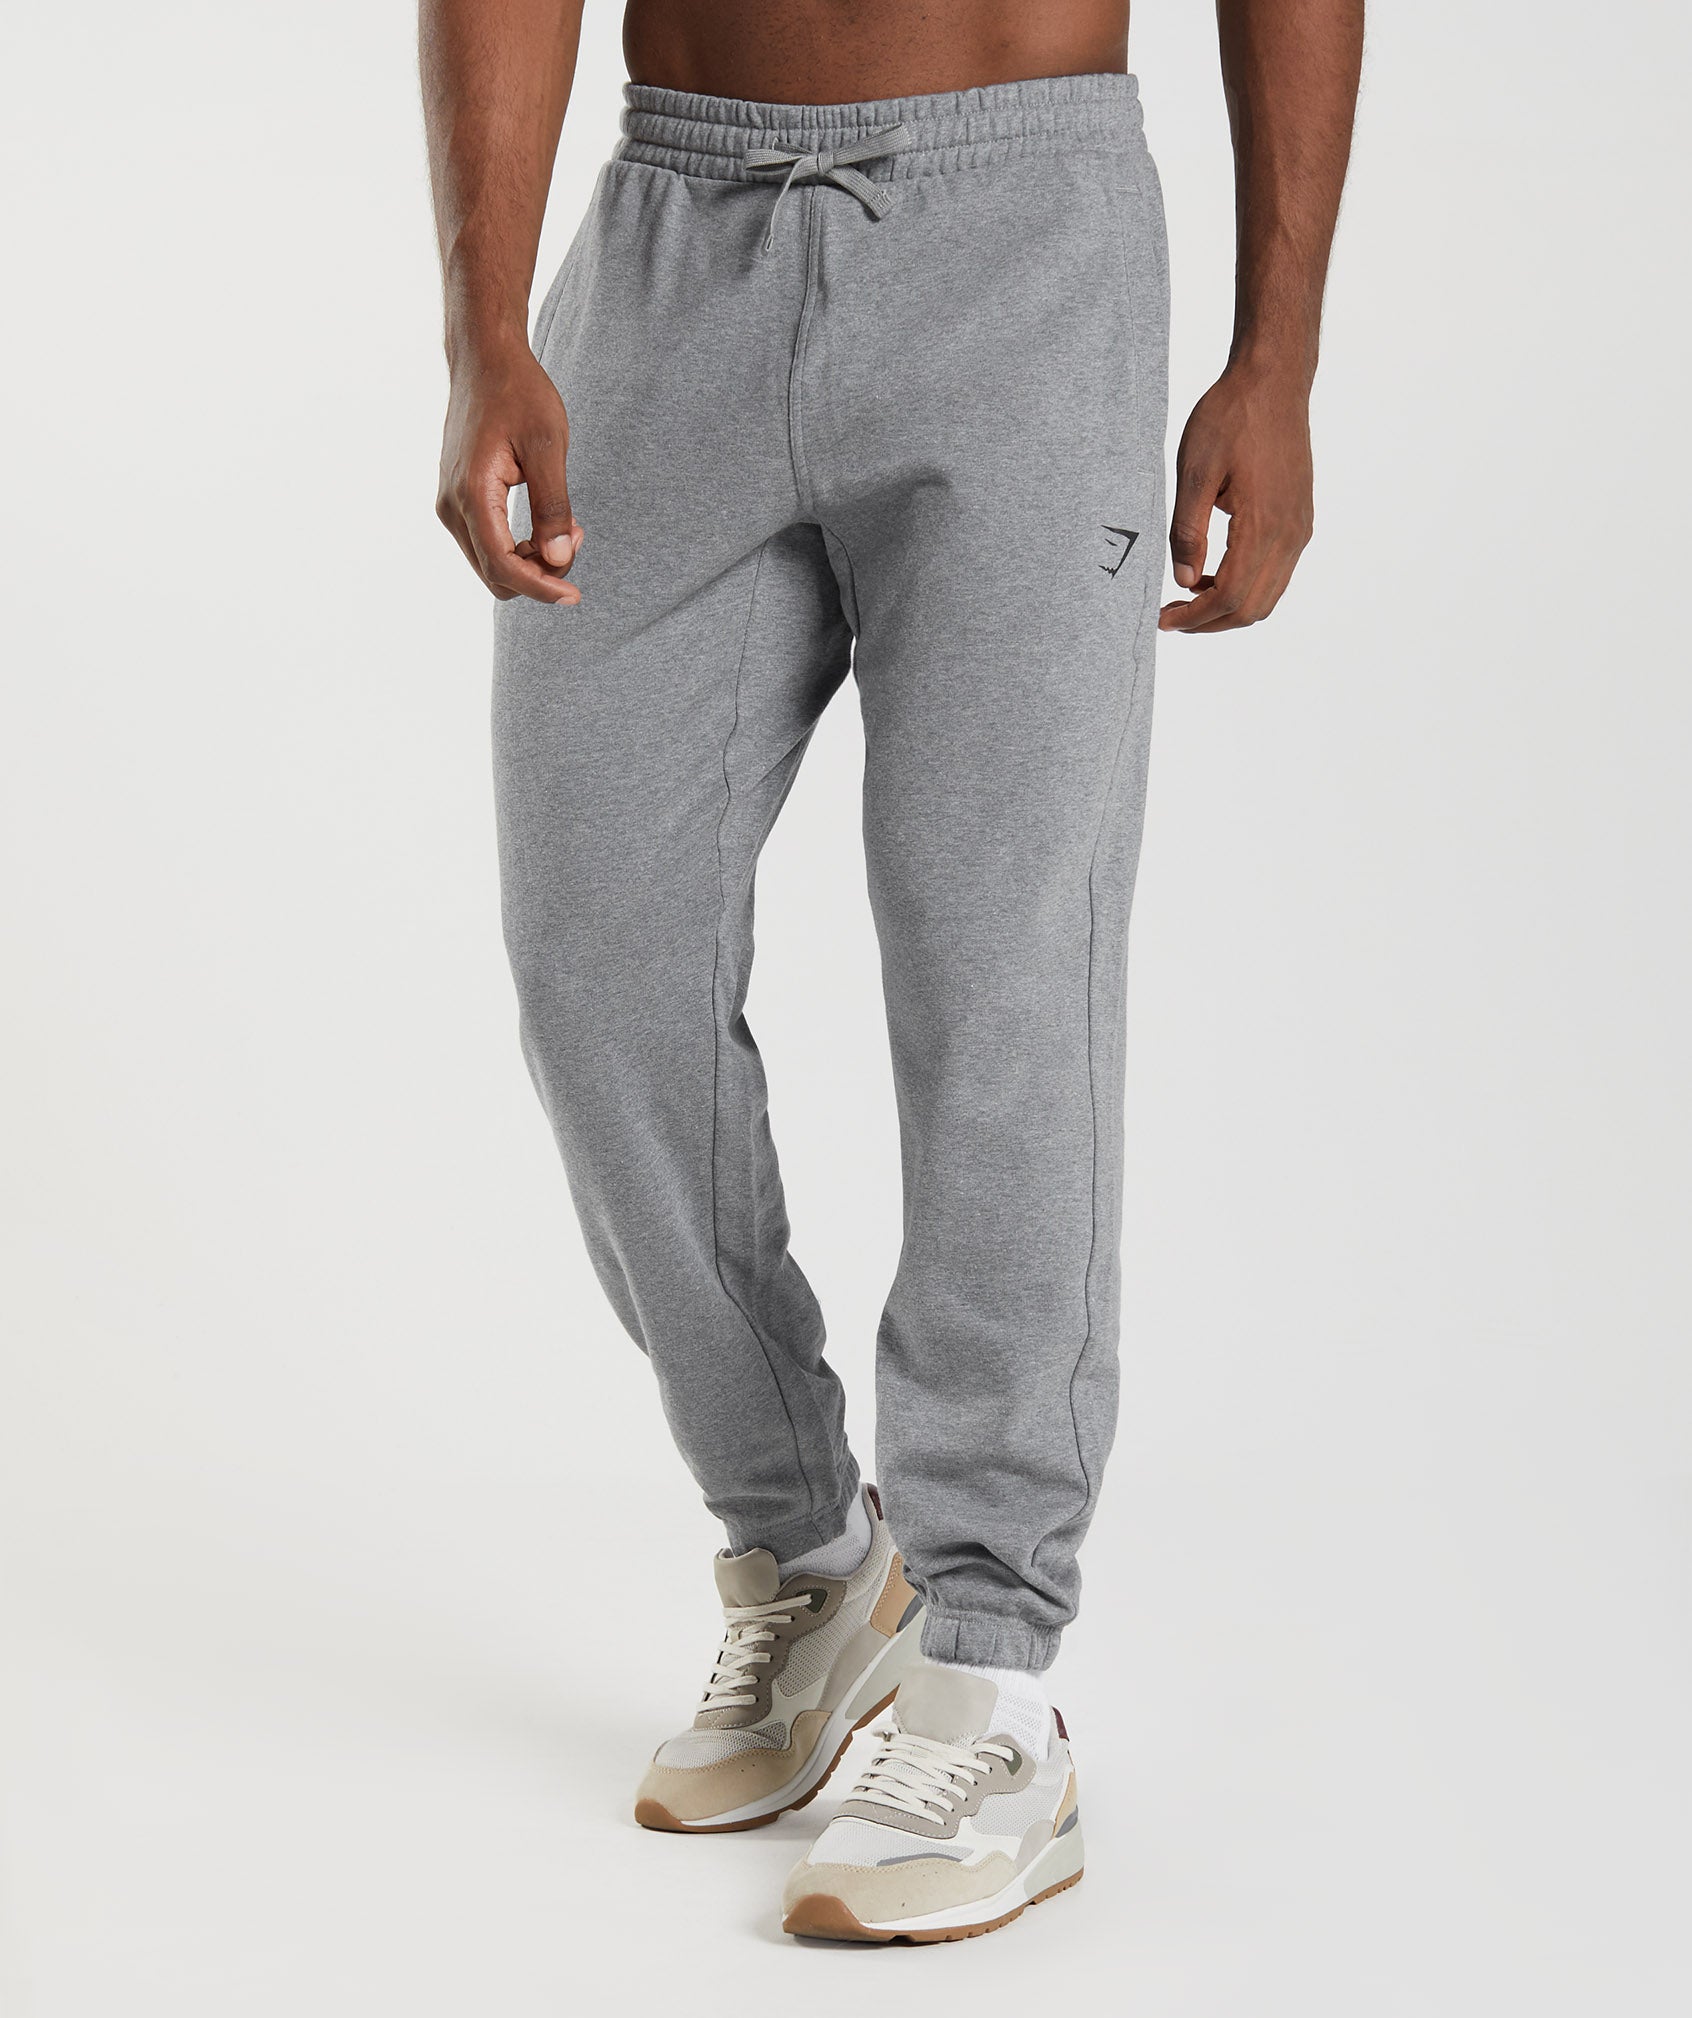 ScR SPORTSWEAR Mens Sweatpants Tapered Slim Workout Athletic Running  Joggers Activewear Lounge Pants with 30 L Inseam (M X 30L, Heather  grey-K536)